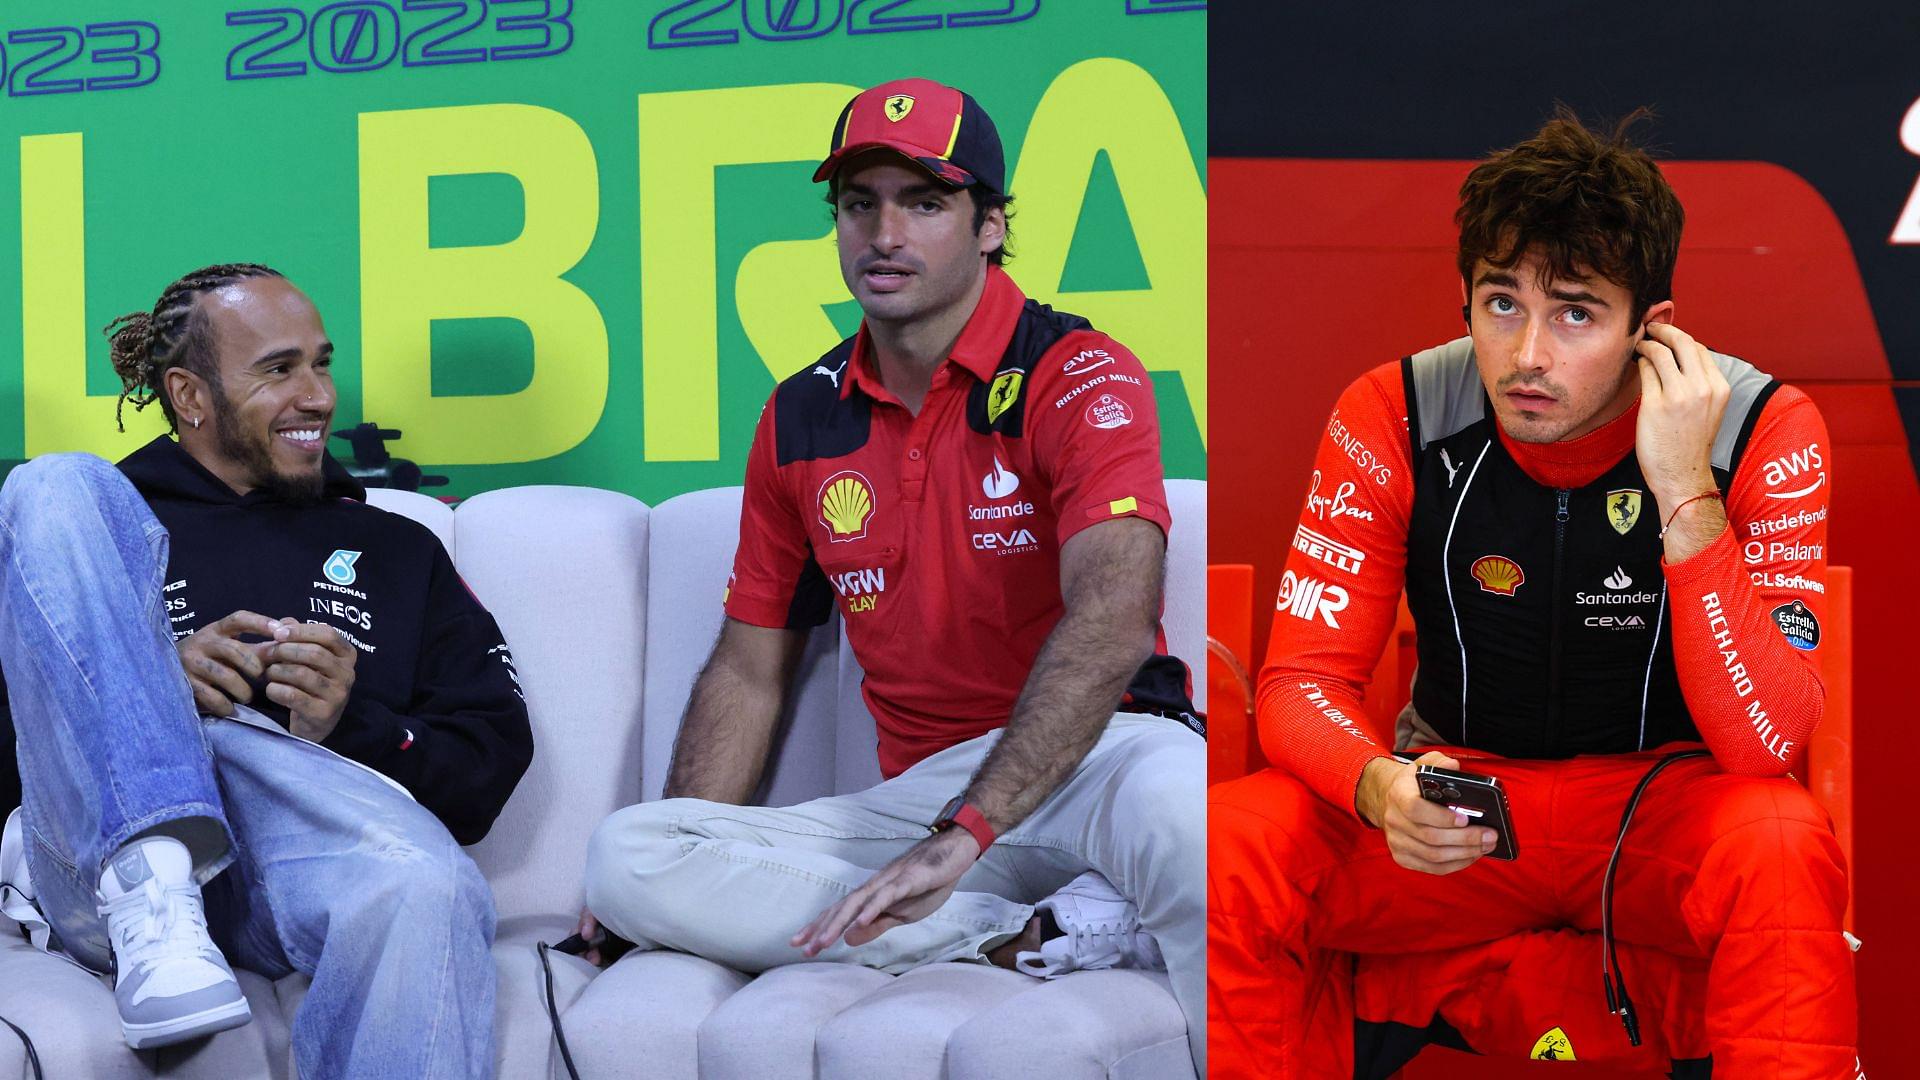 F1 Expert Suggests Carlos Sainz to Use Lewis Hamilton Pressure as Bait to Outshine Charles Leclerc